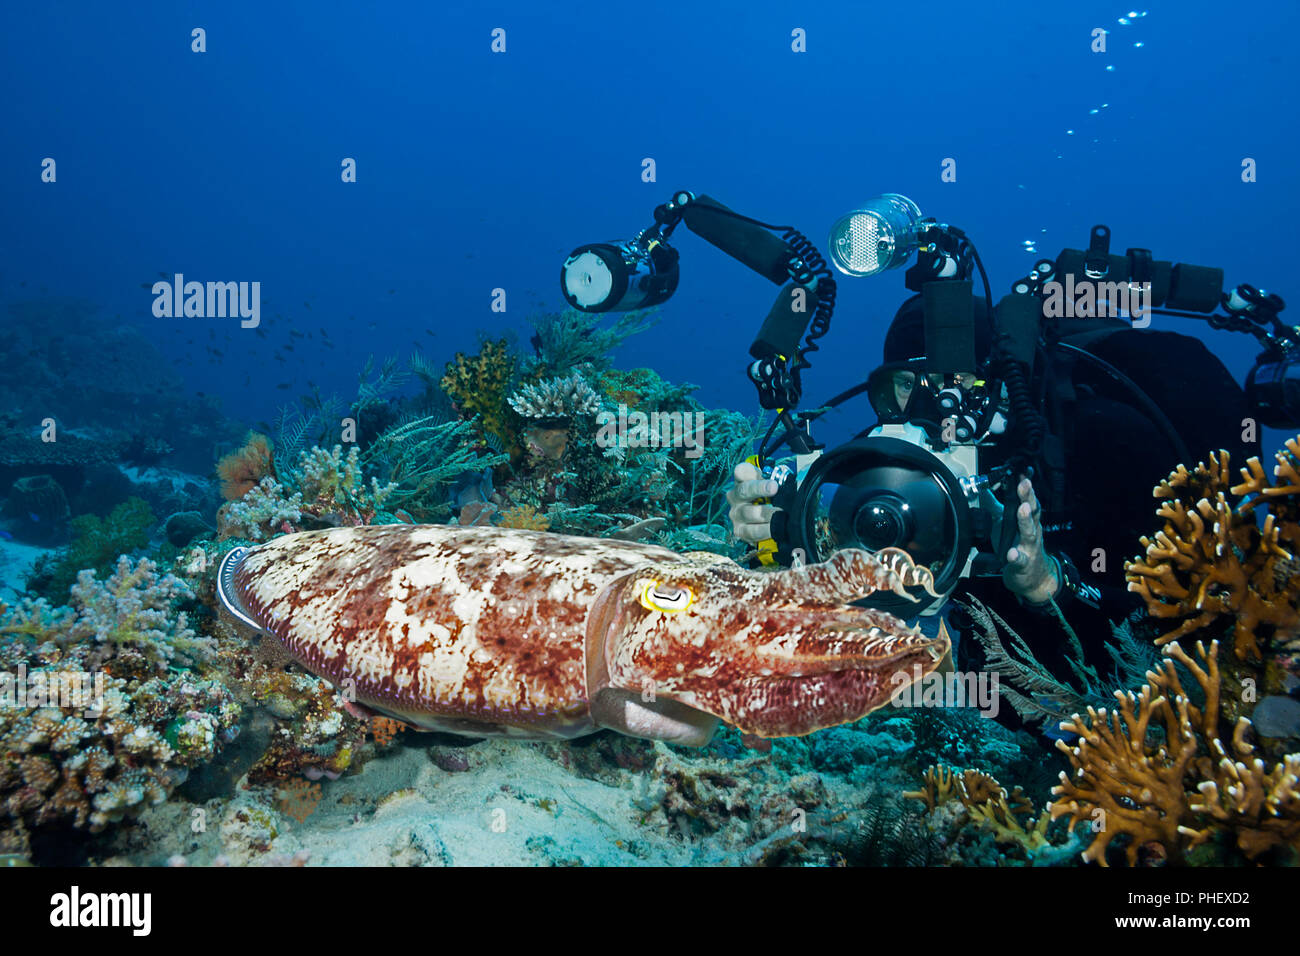 A diver (MR) points his camera at a common cuttlefish, Sepia latimanus, in Komodo, Indonesia. Stock Photo